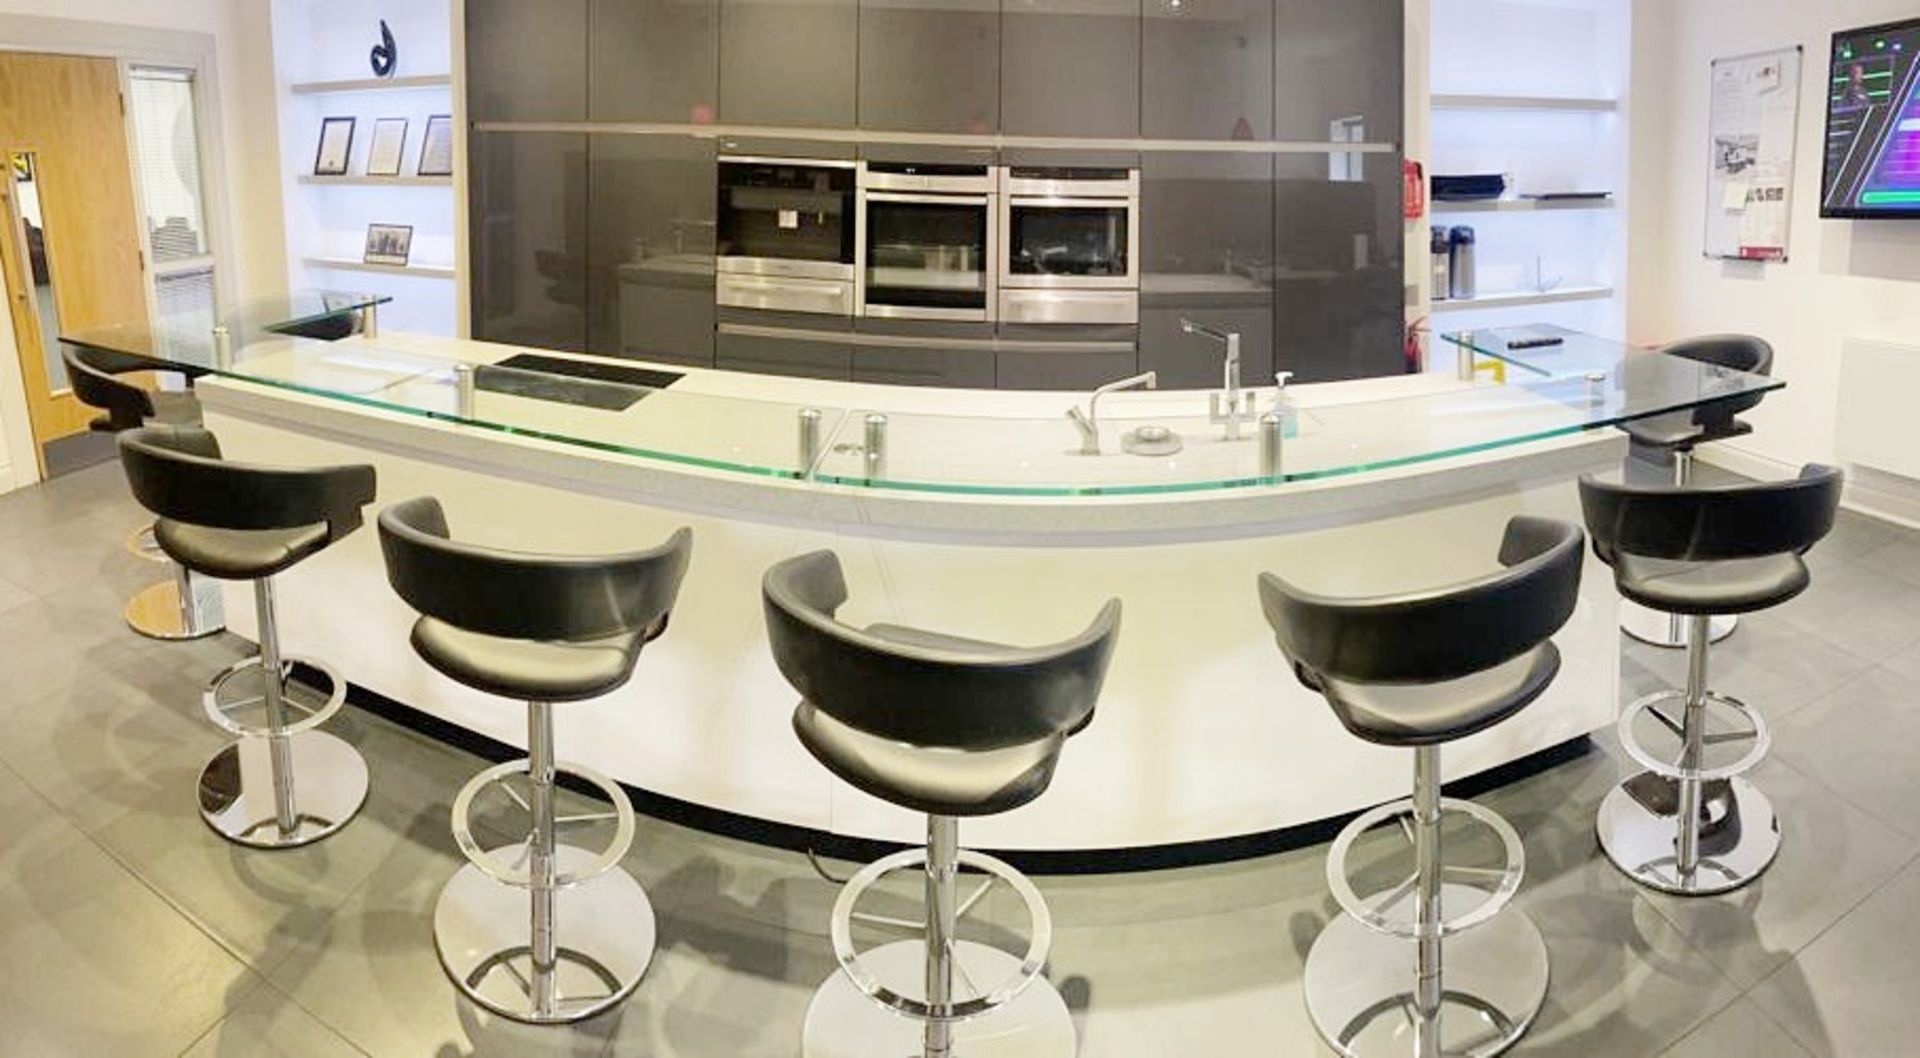 1 x SIEMATIC Bespoke Handleless Gloss Fitted Kitchen with 3.6m Island, Appliances & Granite Worktops - Image 3 of 117